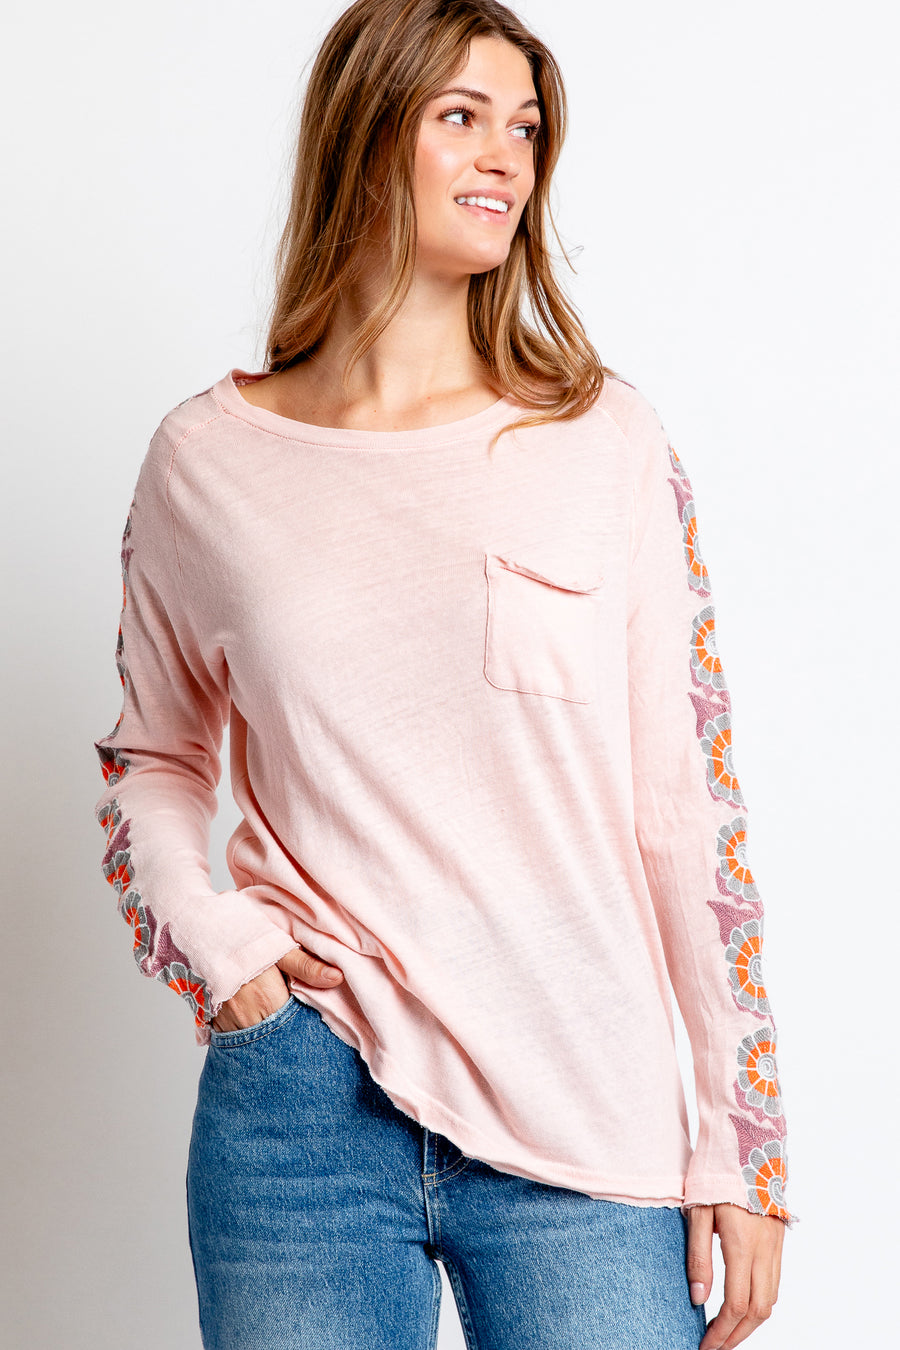 Free People On the Vine Tee in Pink Combo